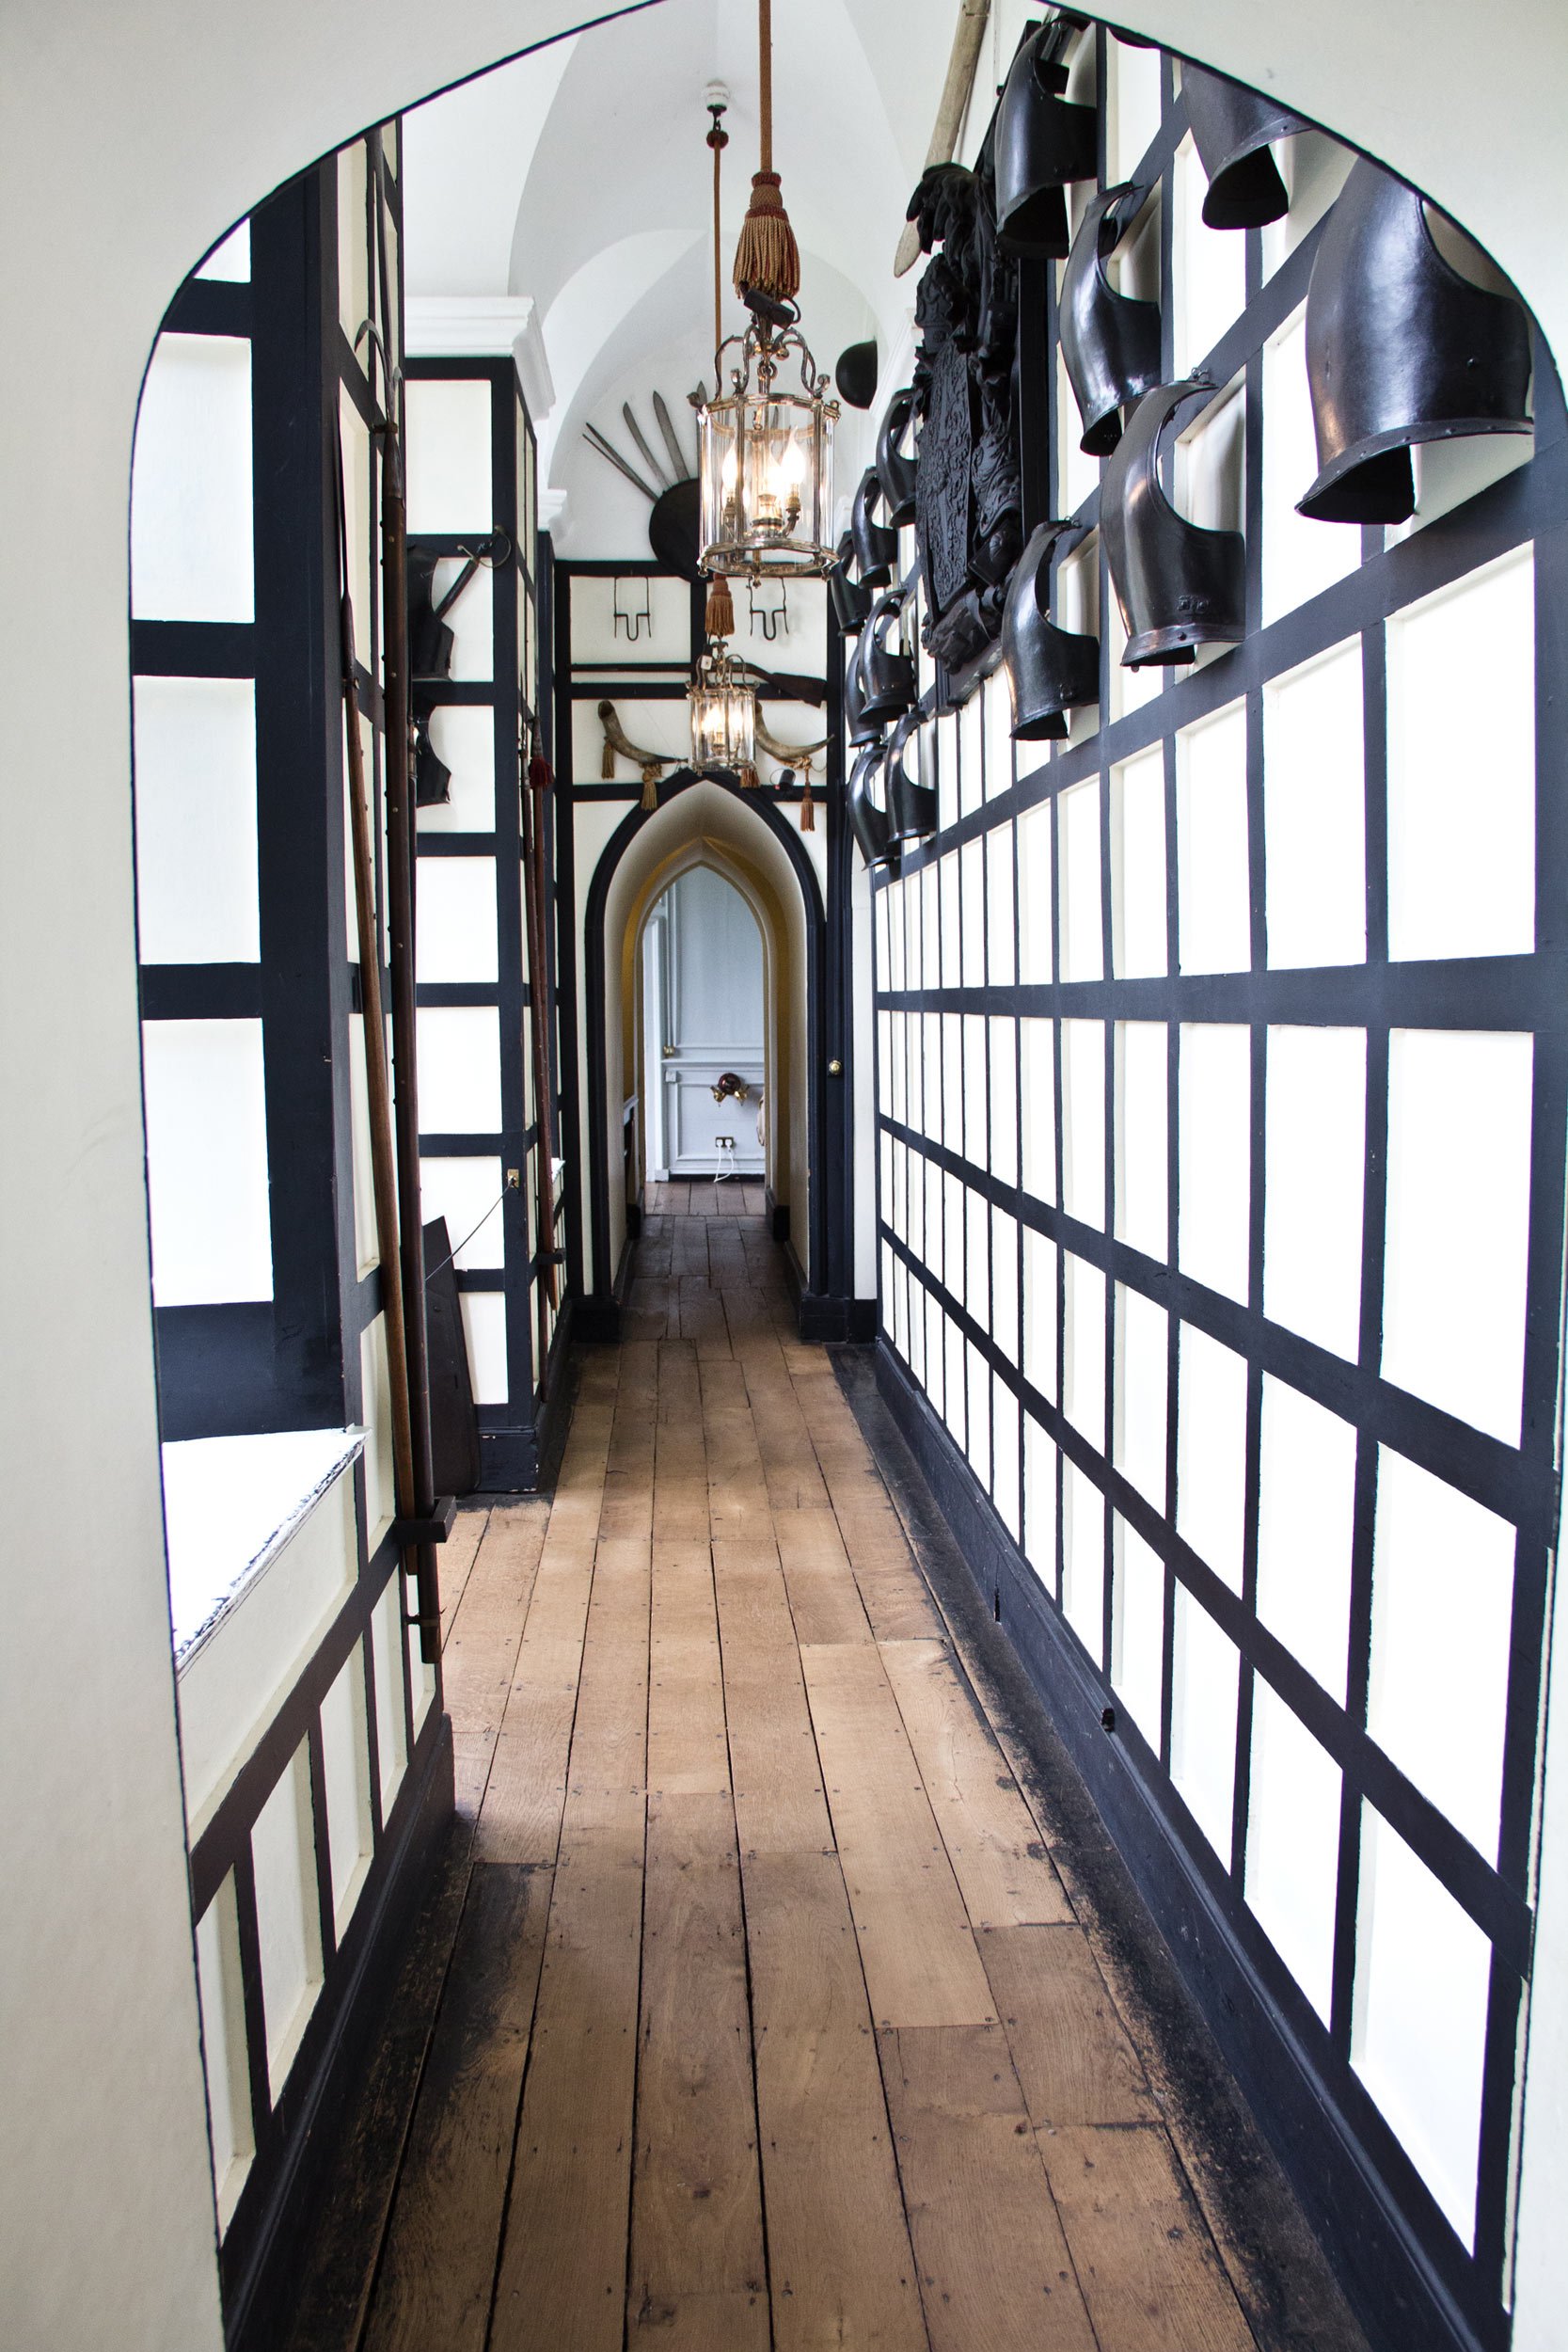 timbered-hallway-in-warwick-castle-england